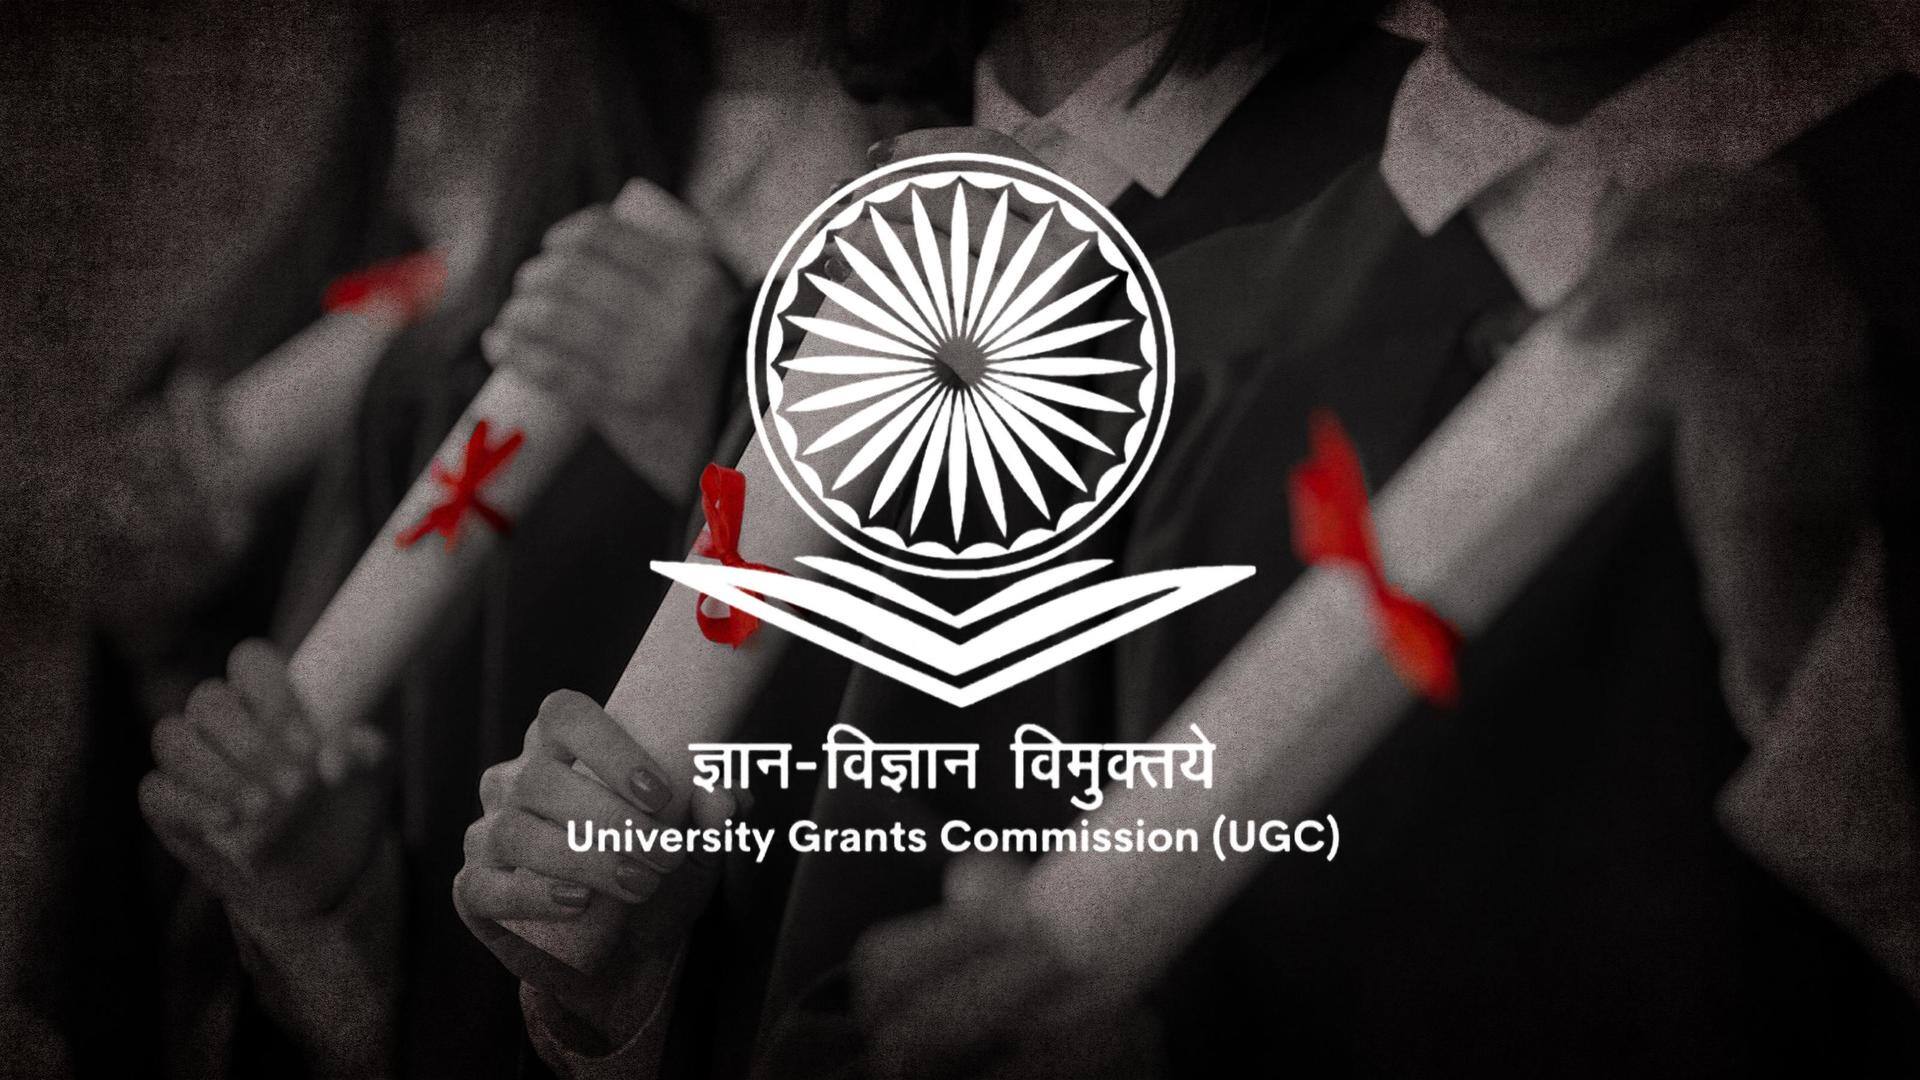 UGC new rule mandates 4-year course for 'Honors' degree